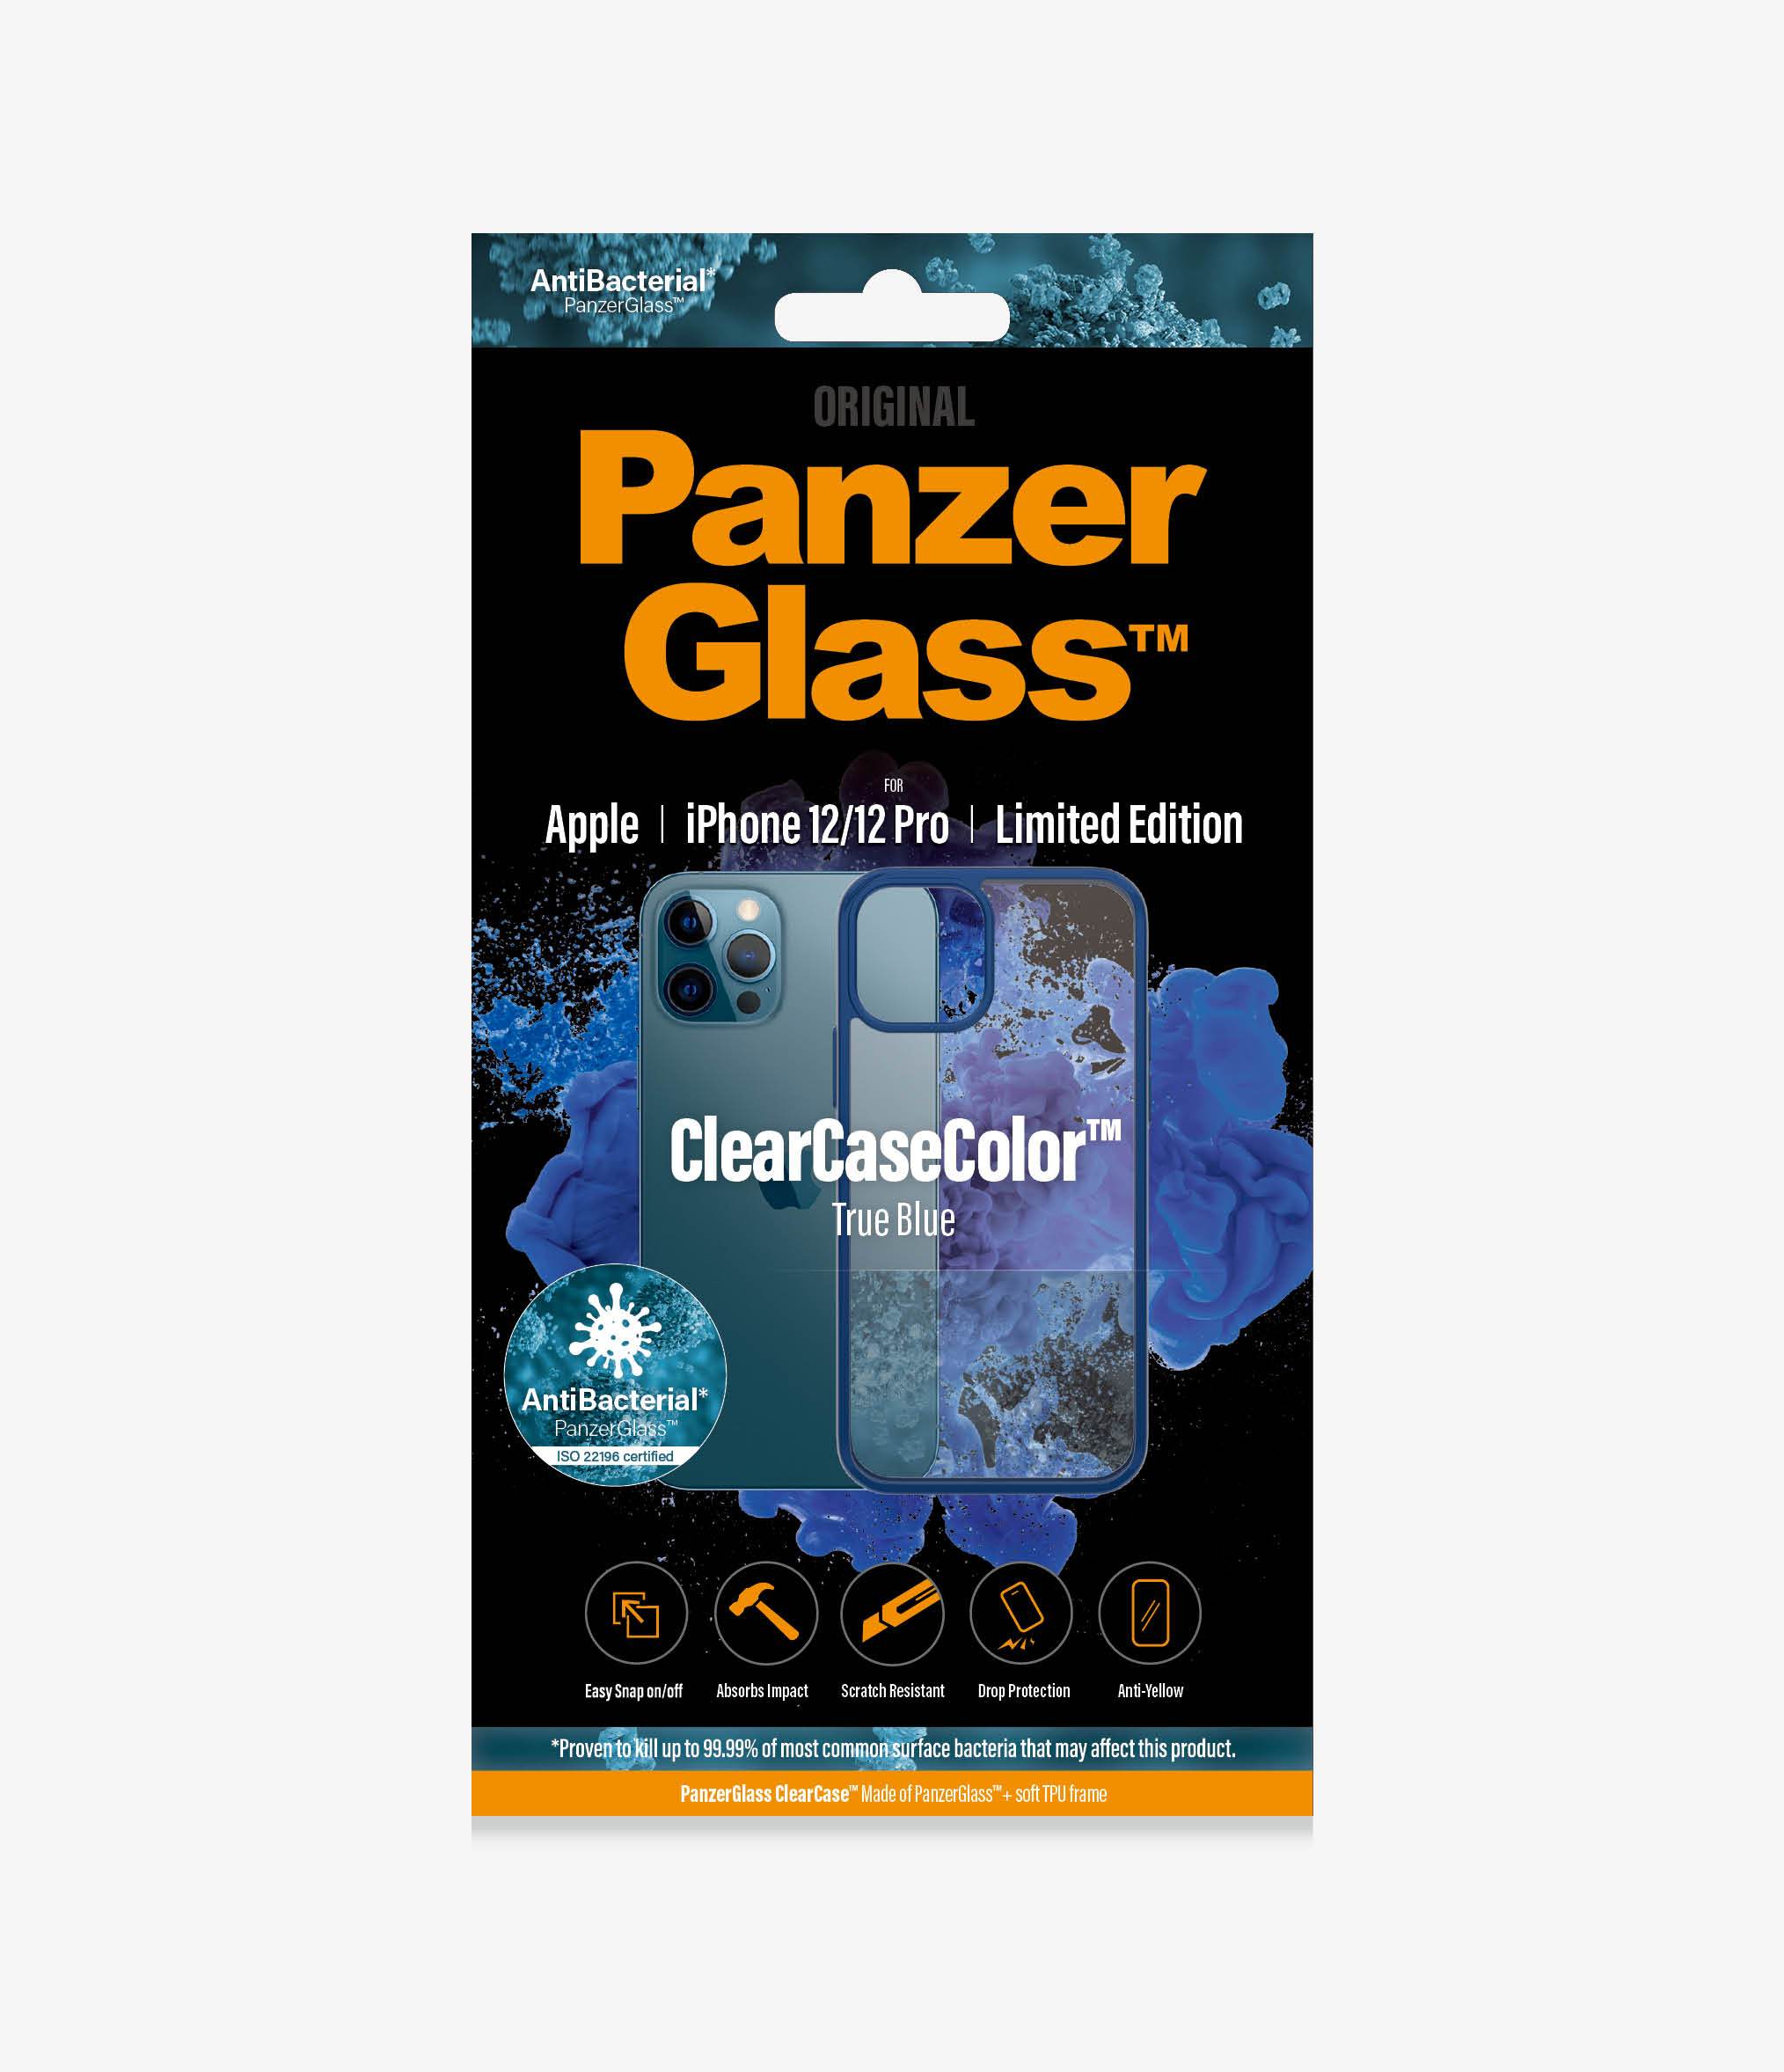 PanzerGlass™ ClearCaseColor™ Apple iPhone 12/12 Pro - True Blue Limited Edition (0277), Slim fashionable design, Tempered anti-aging glass back